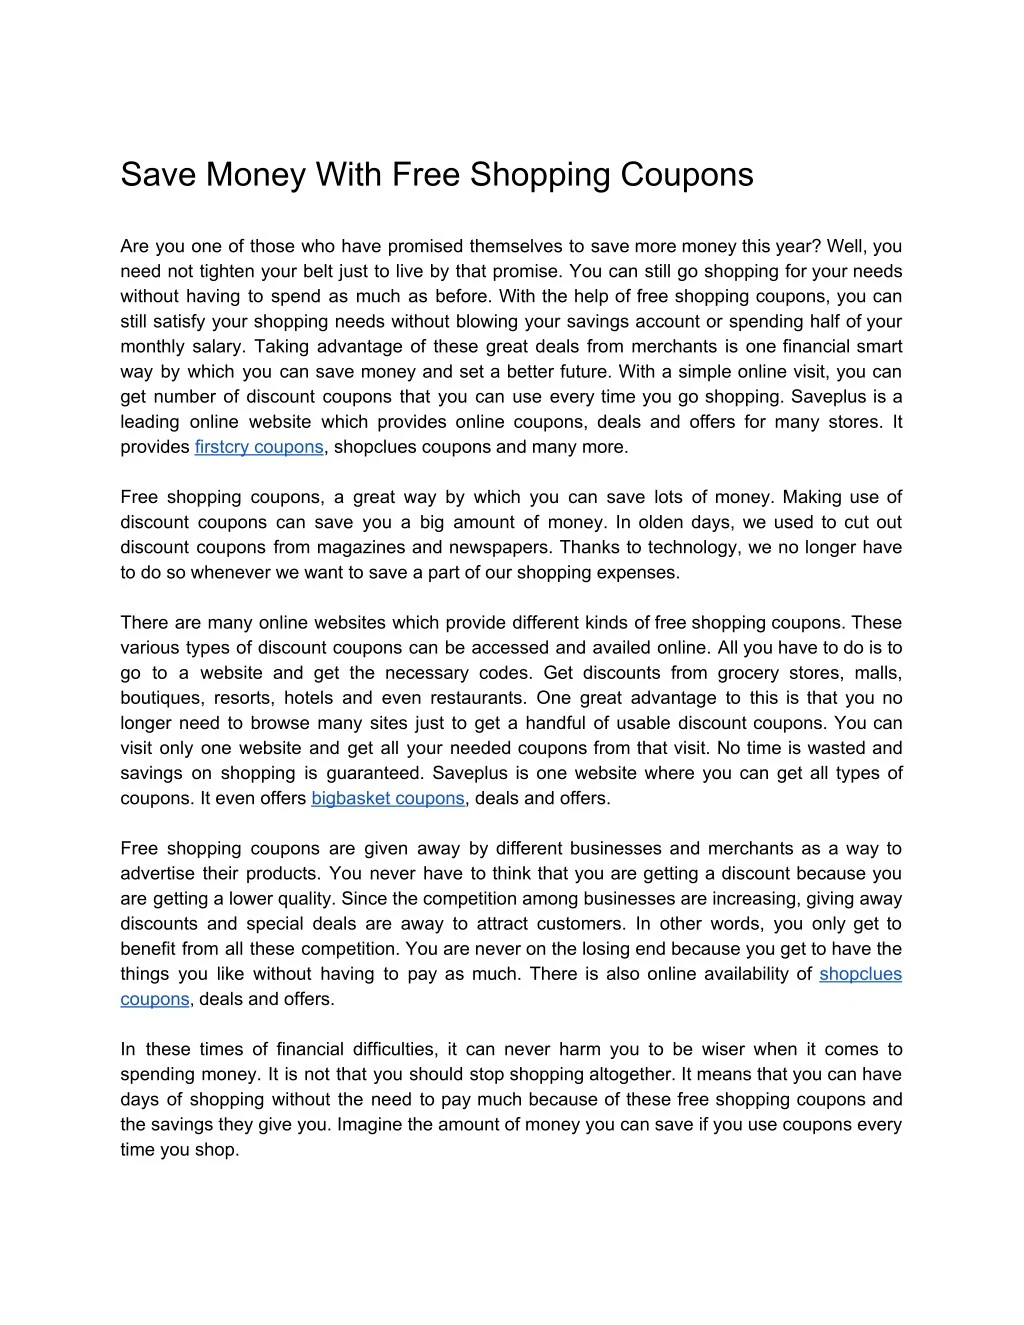 save money with free shopping coupons